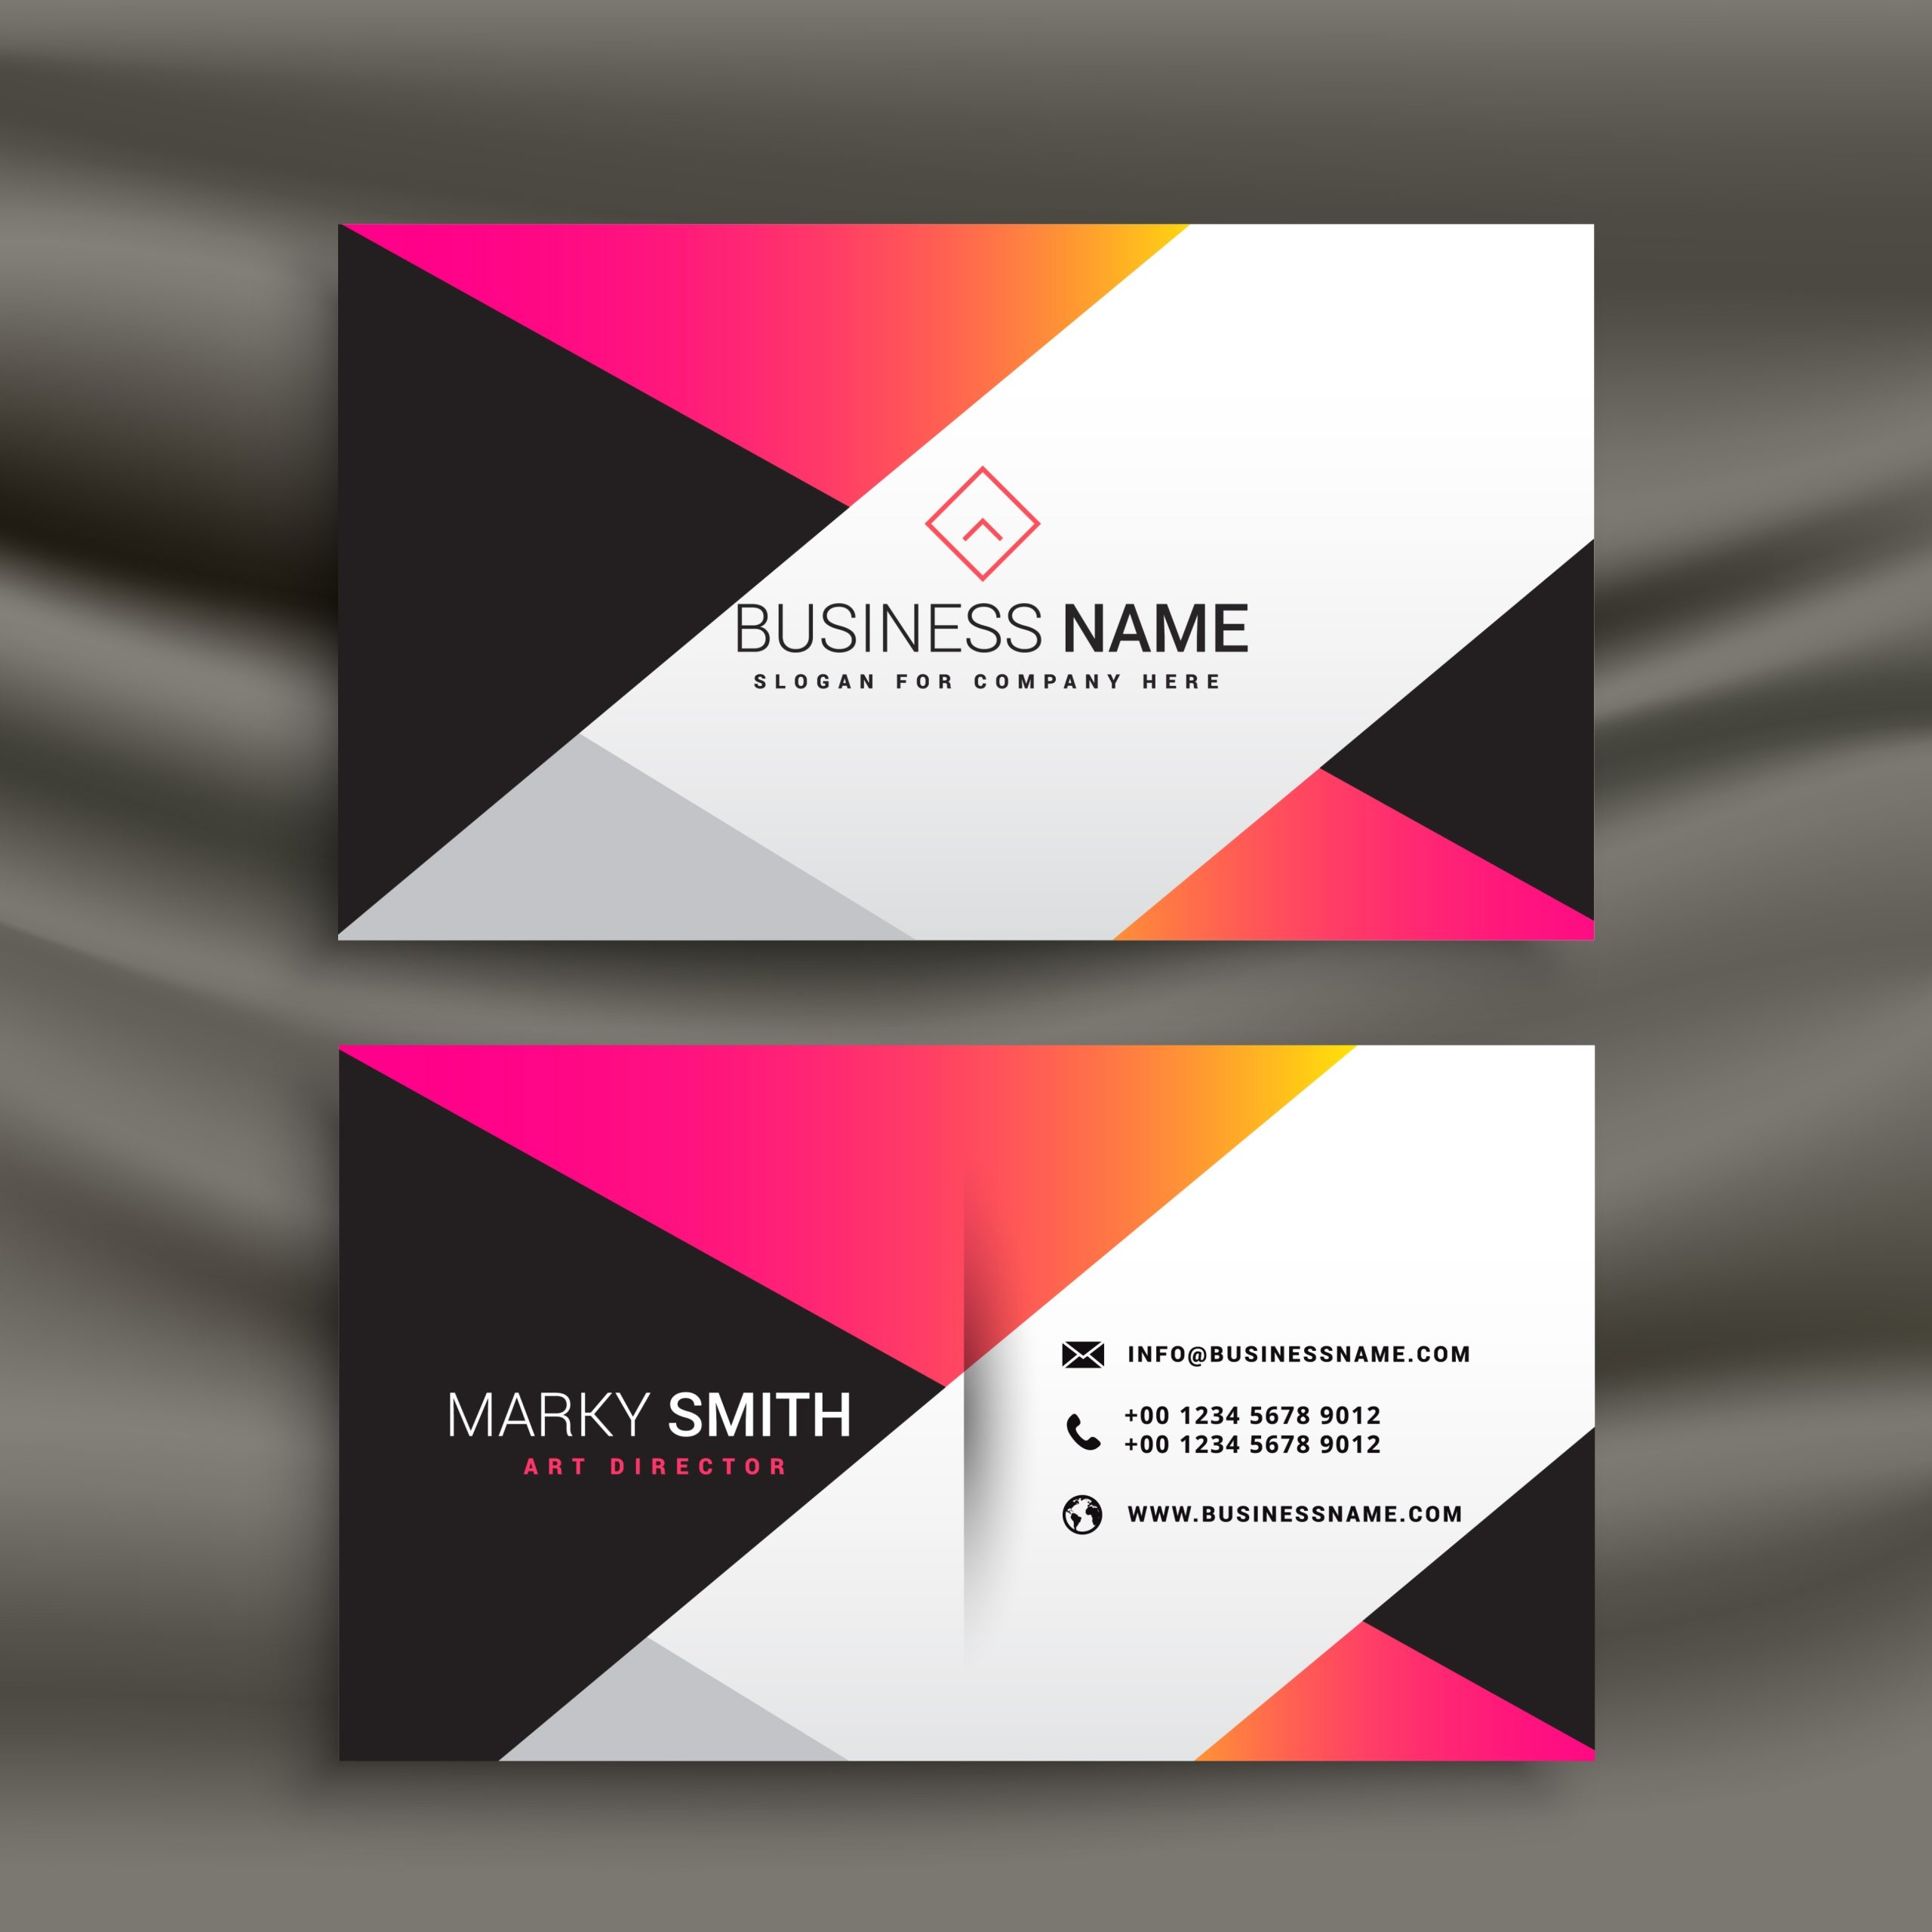 Creative Bright Business Card Design Template – Download Free Vector For Web Design Business Cards Templates